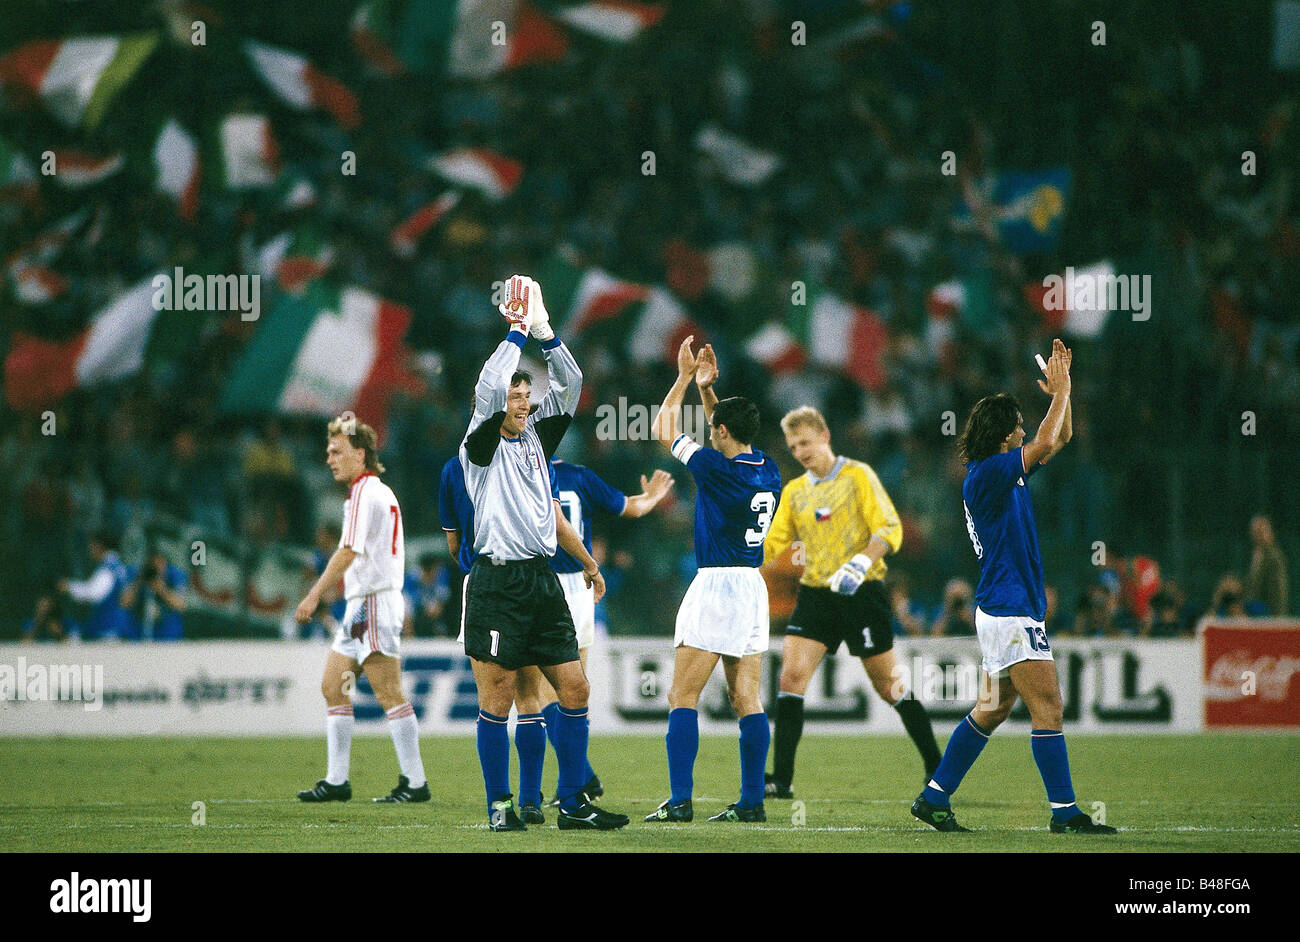 Sport / Sports, soccer, football, World Cup 1990, final round, group match, Italy against Czechoslovakia, (2:0) in Rome, Italy, 19.6.1990, Italian team, match, historic, historical, 20th century, people, 1990s, Stock Photo